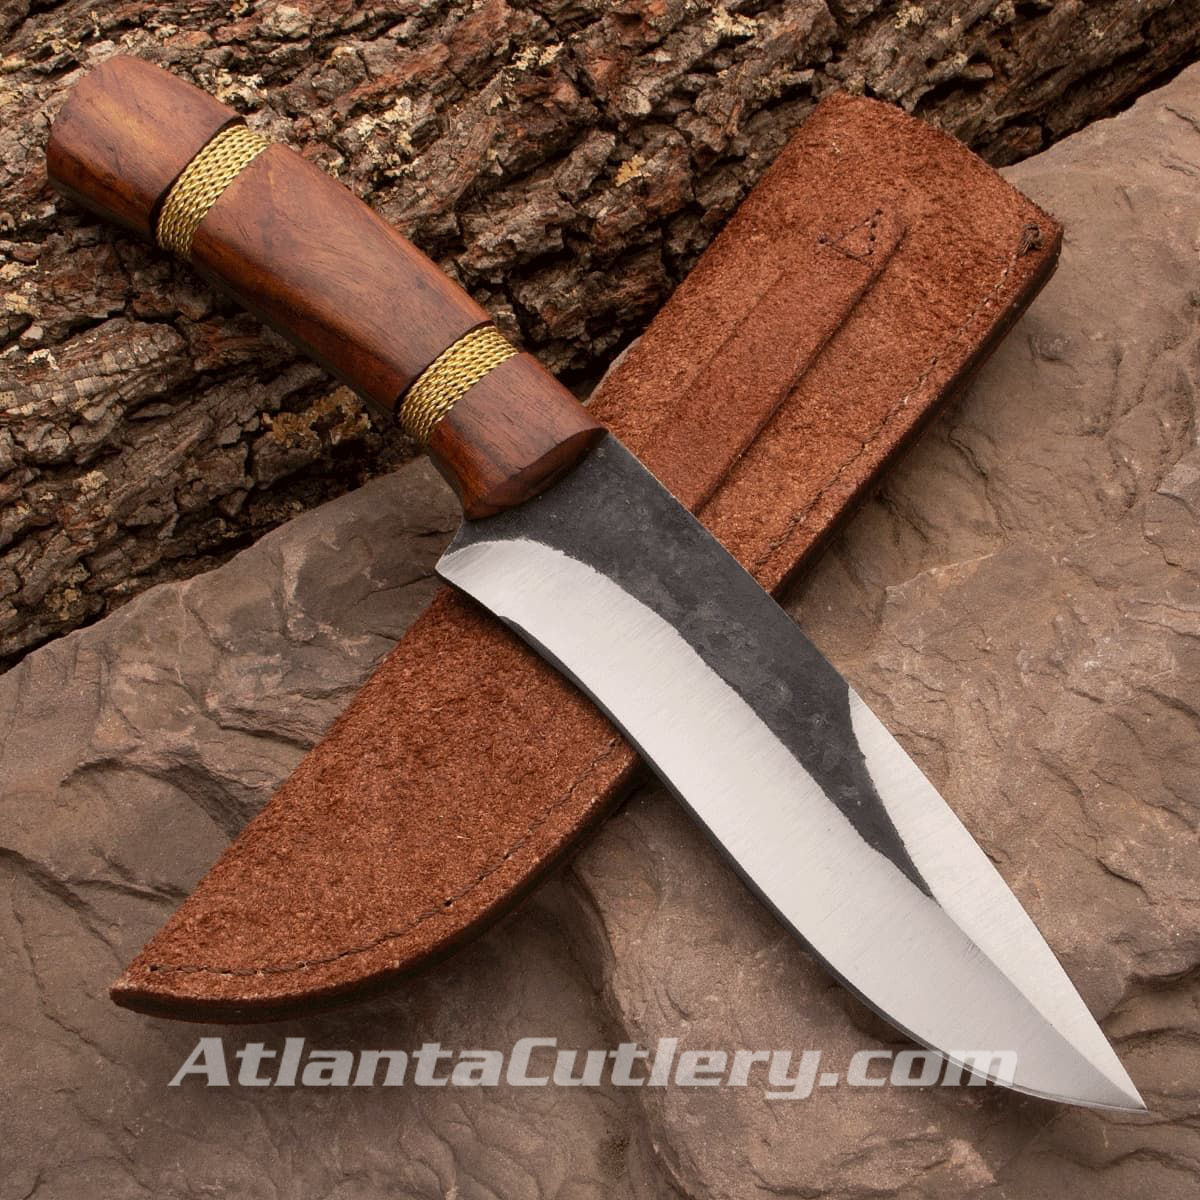 Bushcraft knife with full profile tang carbon steel blade, wood scales with wrapped brass wire, and leather sheath